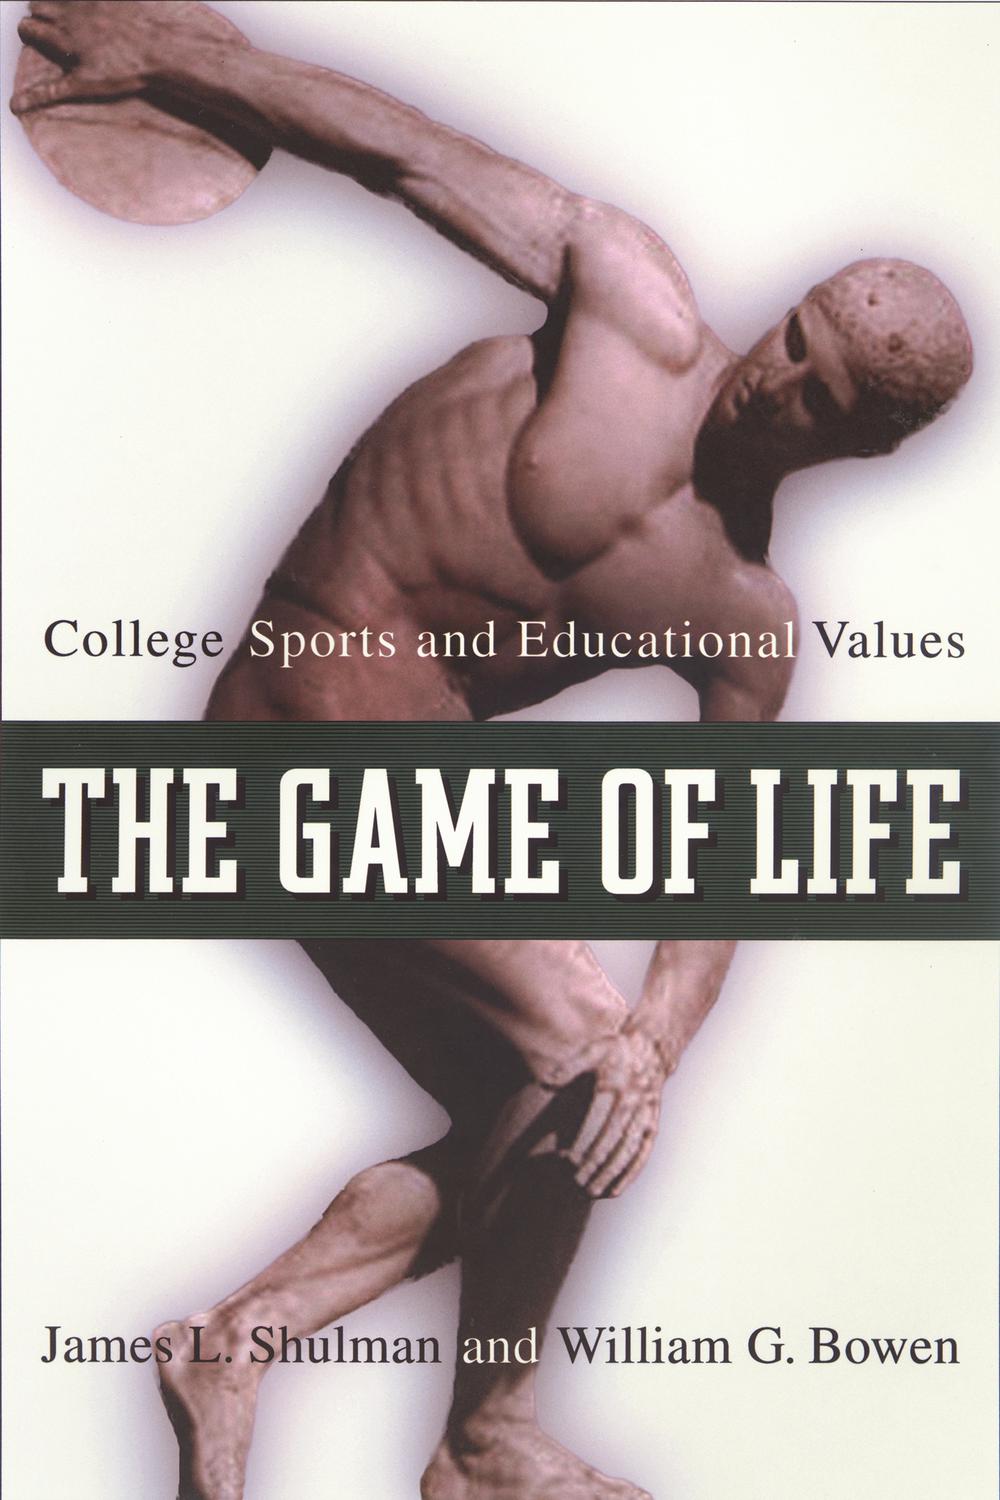 The Game of Life - James L. Shulman, William G. Bowen,,